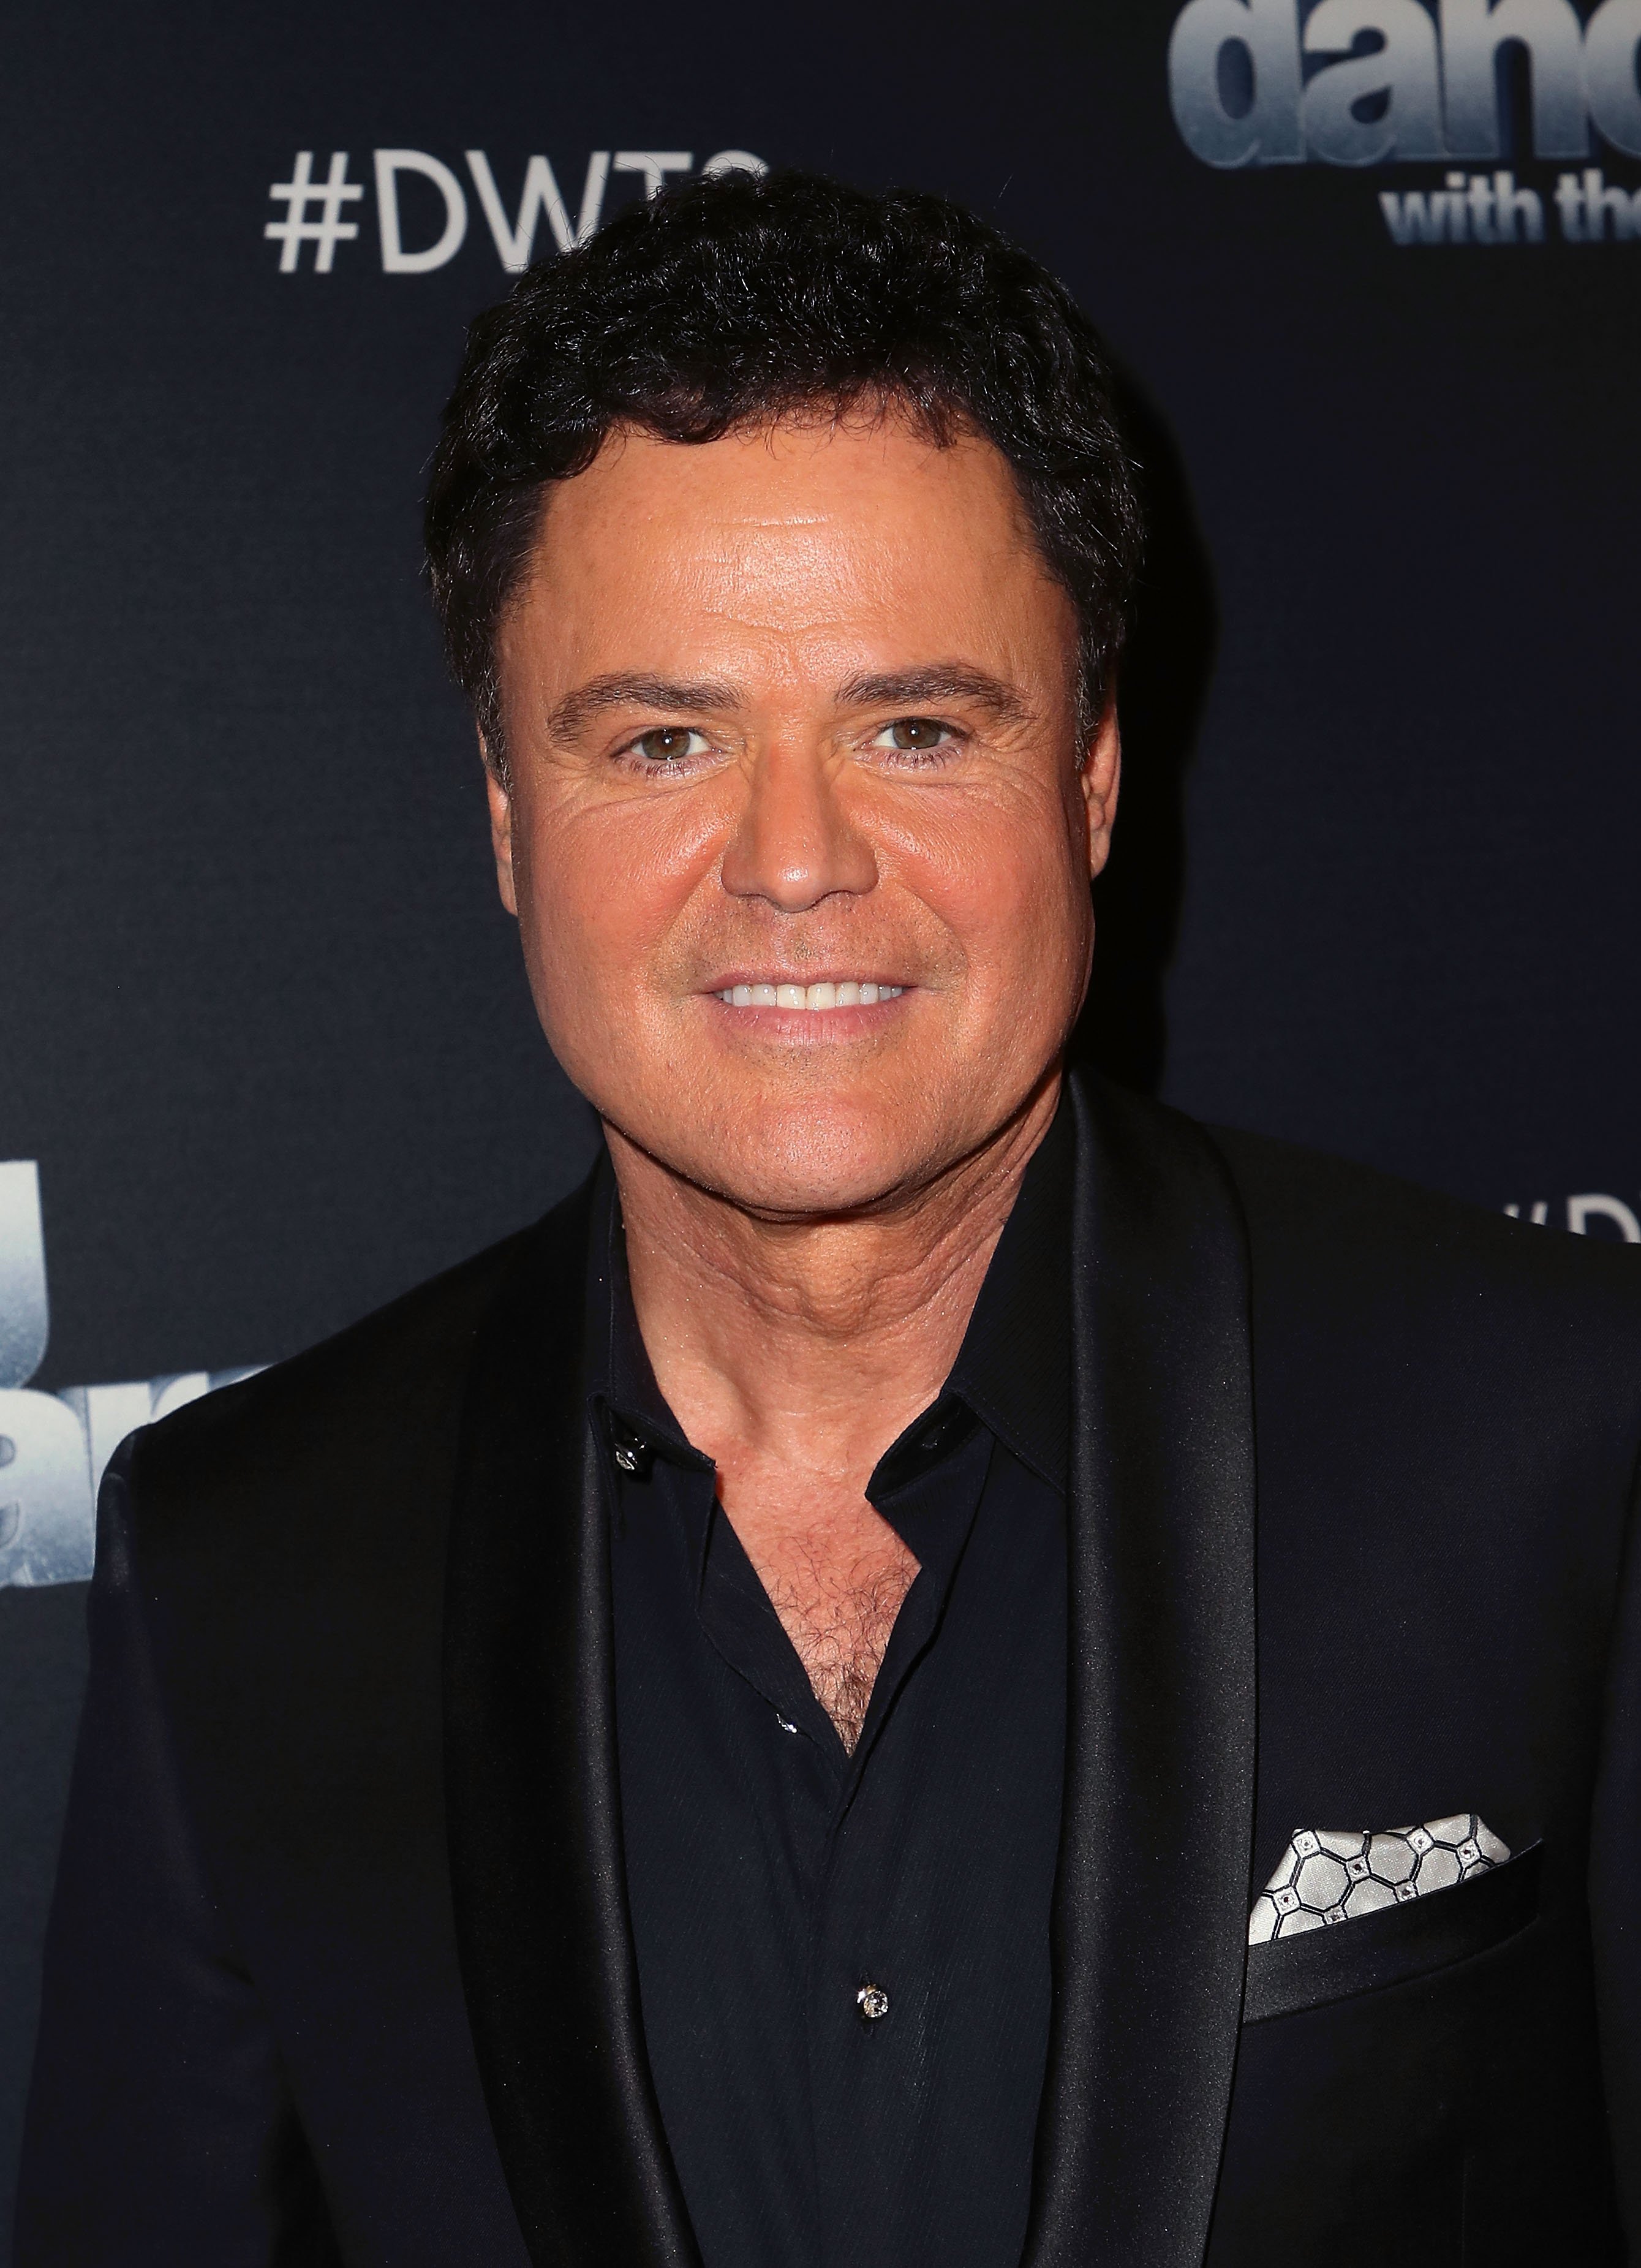 Donny Osmond Pays Touching Tribute to His 'Big Brother' Alan on His